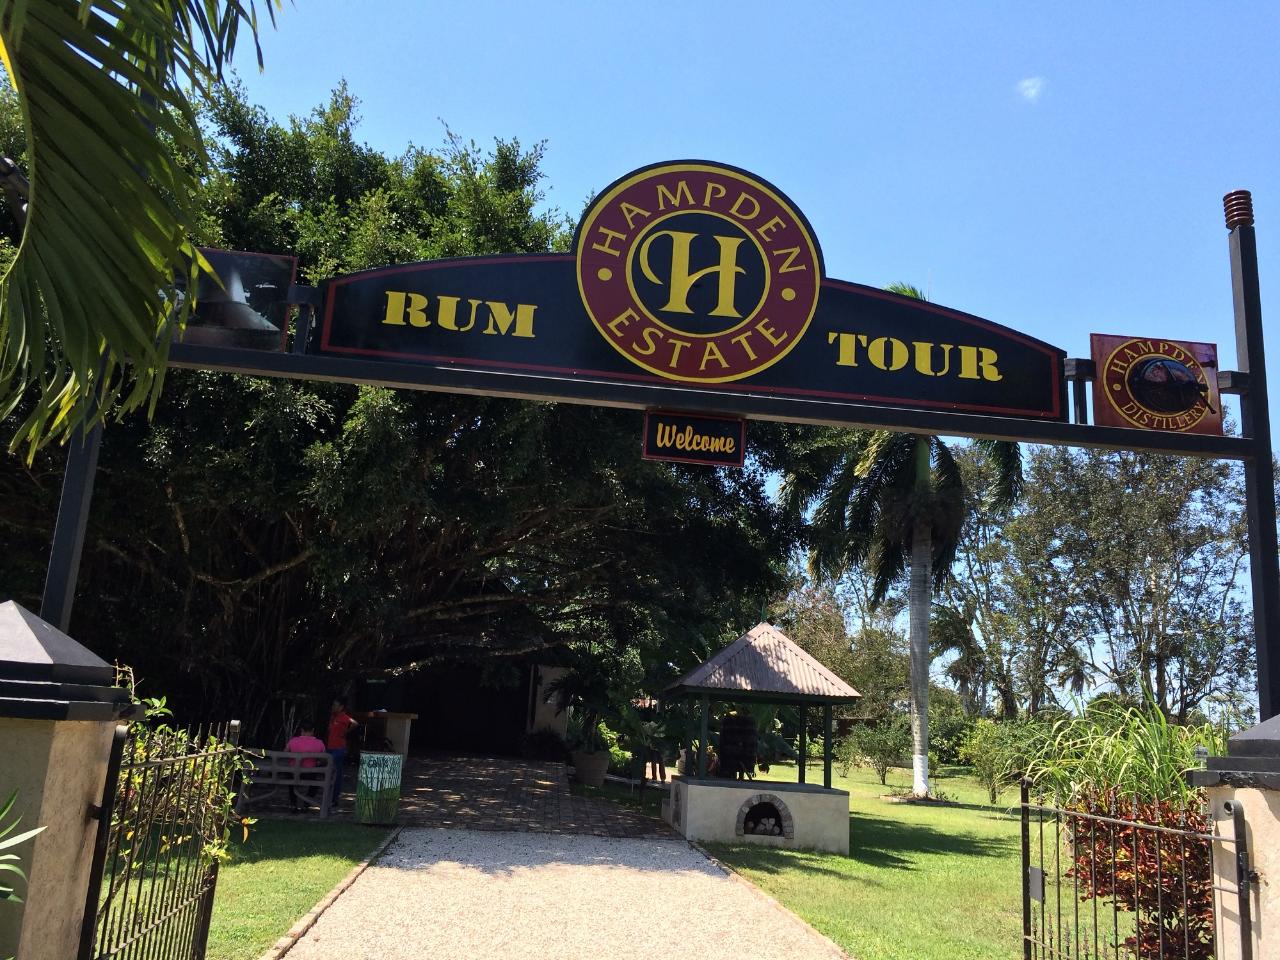 Hampden Estate Rum Tour and Lunch from Montego Bay